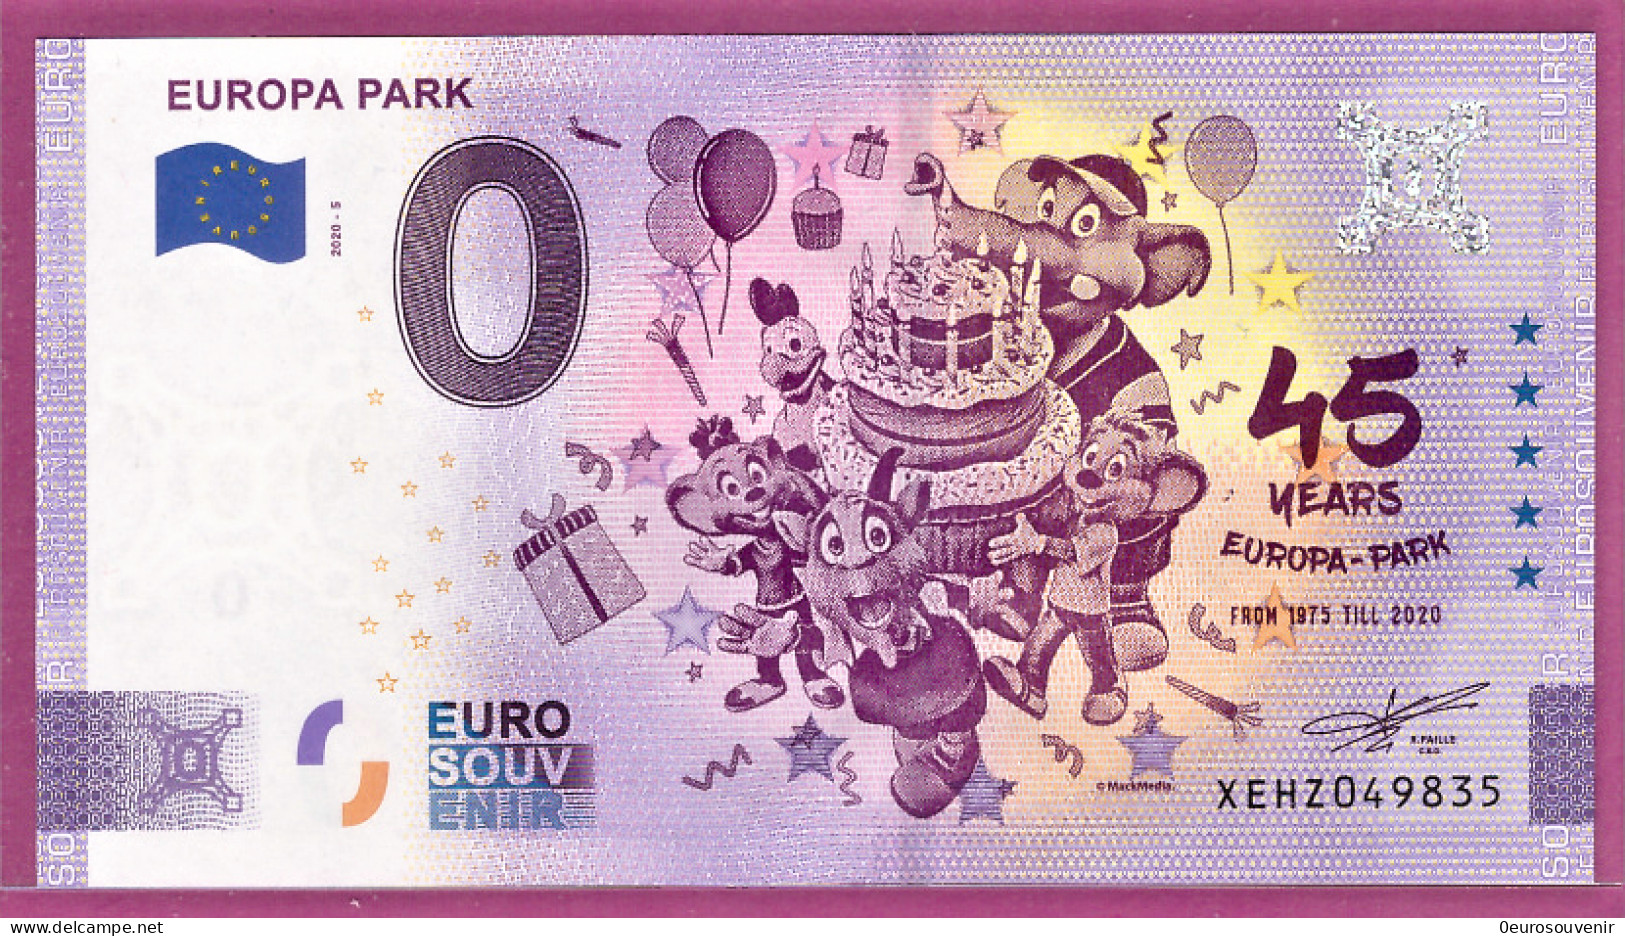 0-Euro XEHZ 2020-5 EUROPA PARK - 45 YEARS Set ANNIVERSARY - Private Proofs / Unofficial